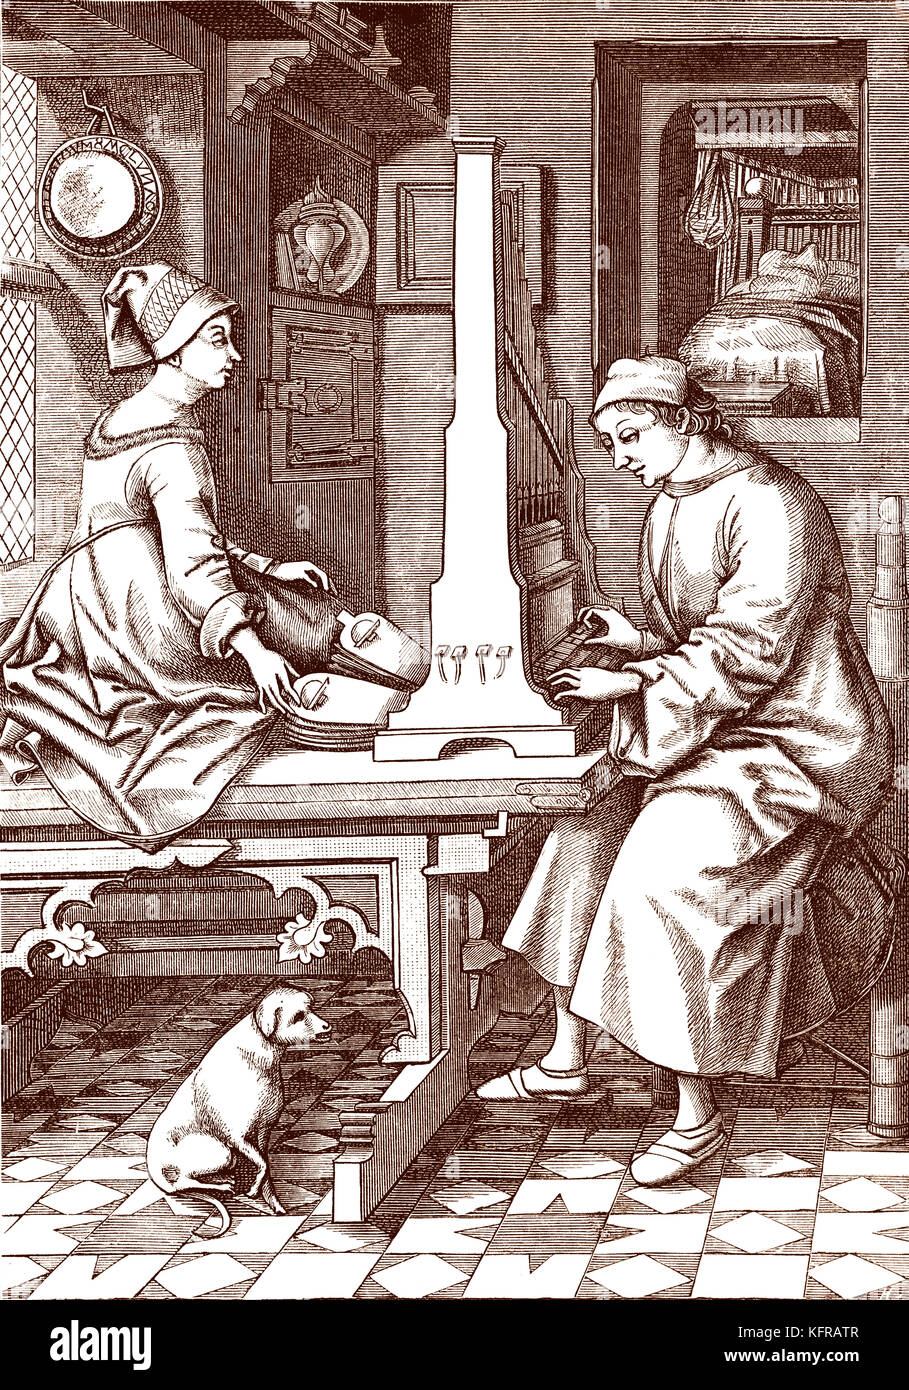 Organist playing a portable organ, reproduced from the original engraving by Israel van Meckenem. (also Israhel) German printer and goldsmith, c. 1445 – 1503. Stock Photo